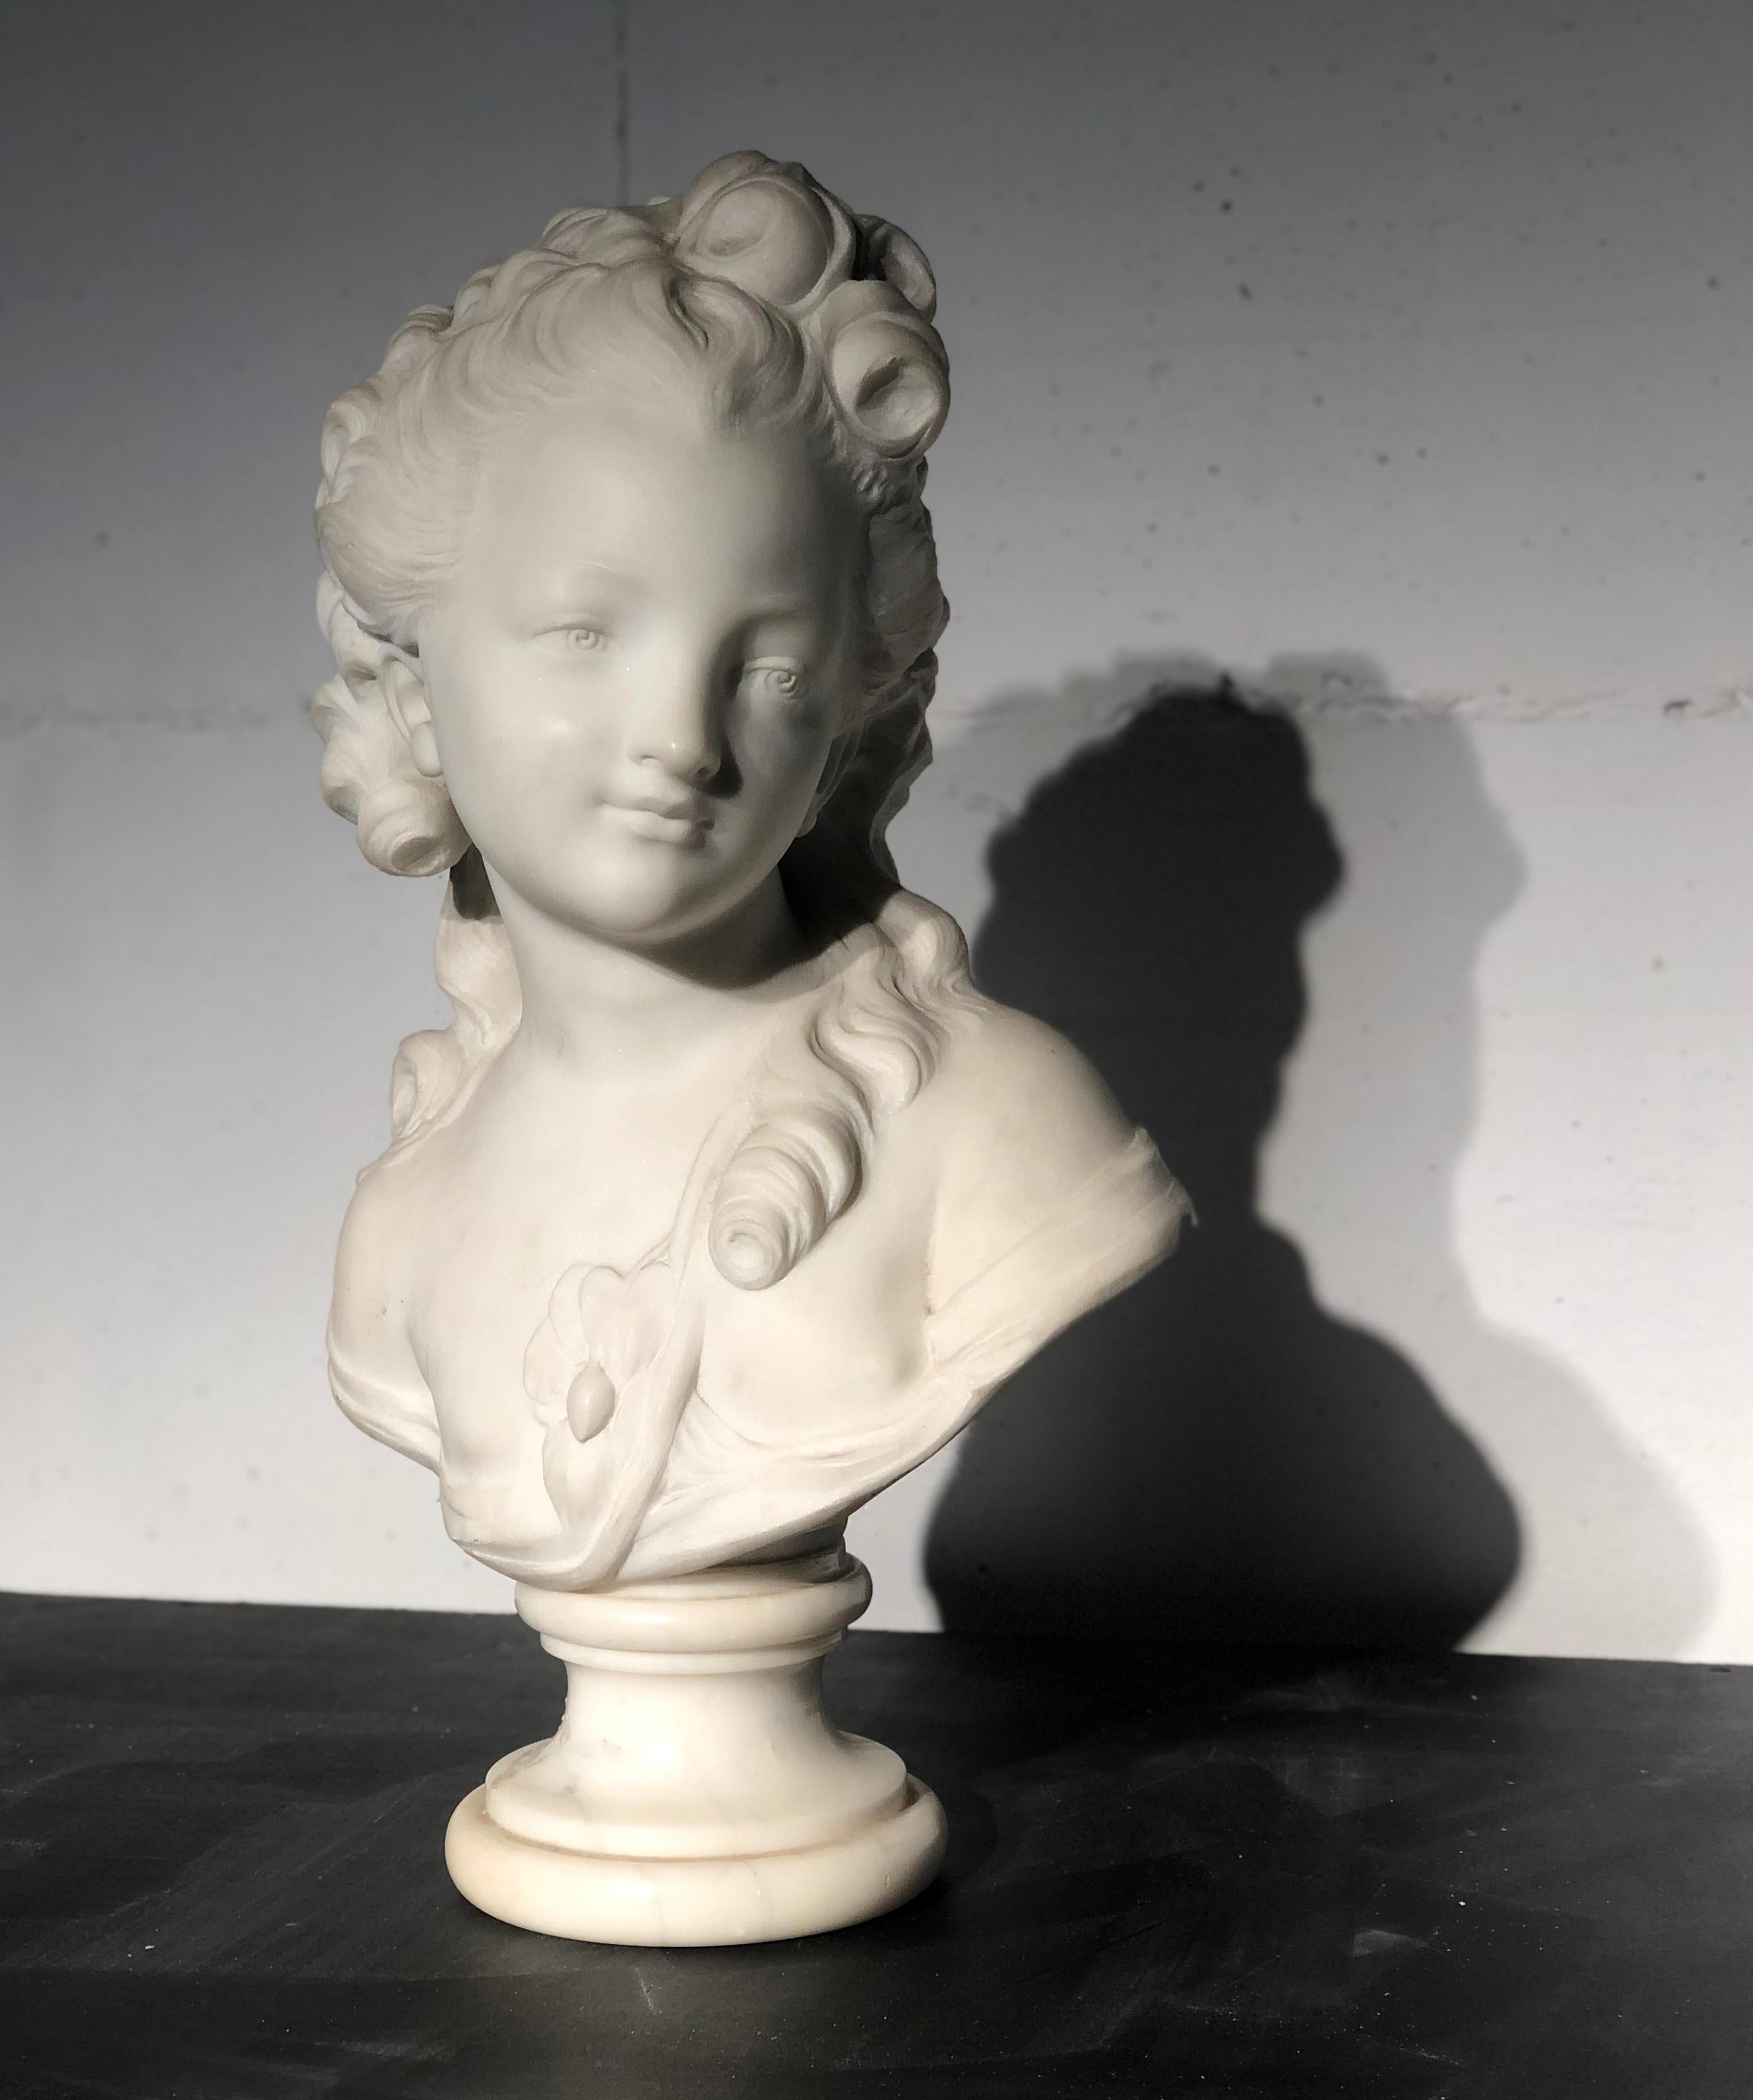 A portrait of a young woman, a bust a quintessential of Lemoyne's works in fact he was well know as of the master of portrait sculpture in marble. Jean-Baptiste Lemoyne (15 February 1704 – 1778) was a French sculptor of the 18th century who worked